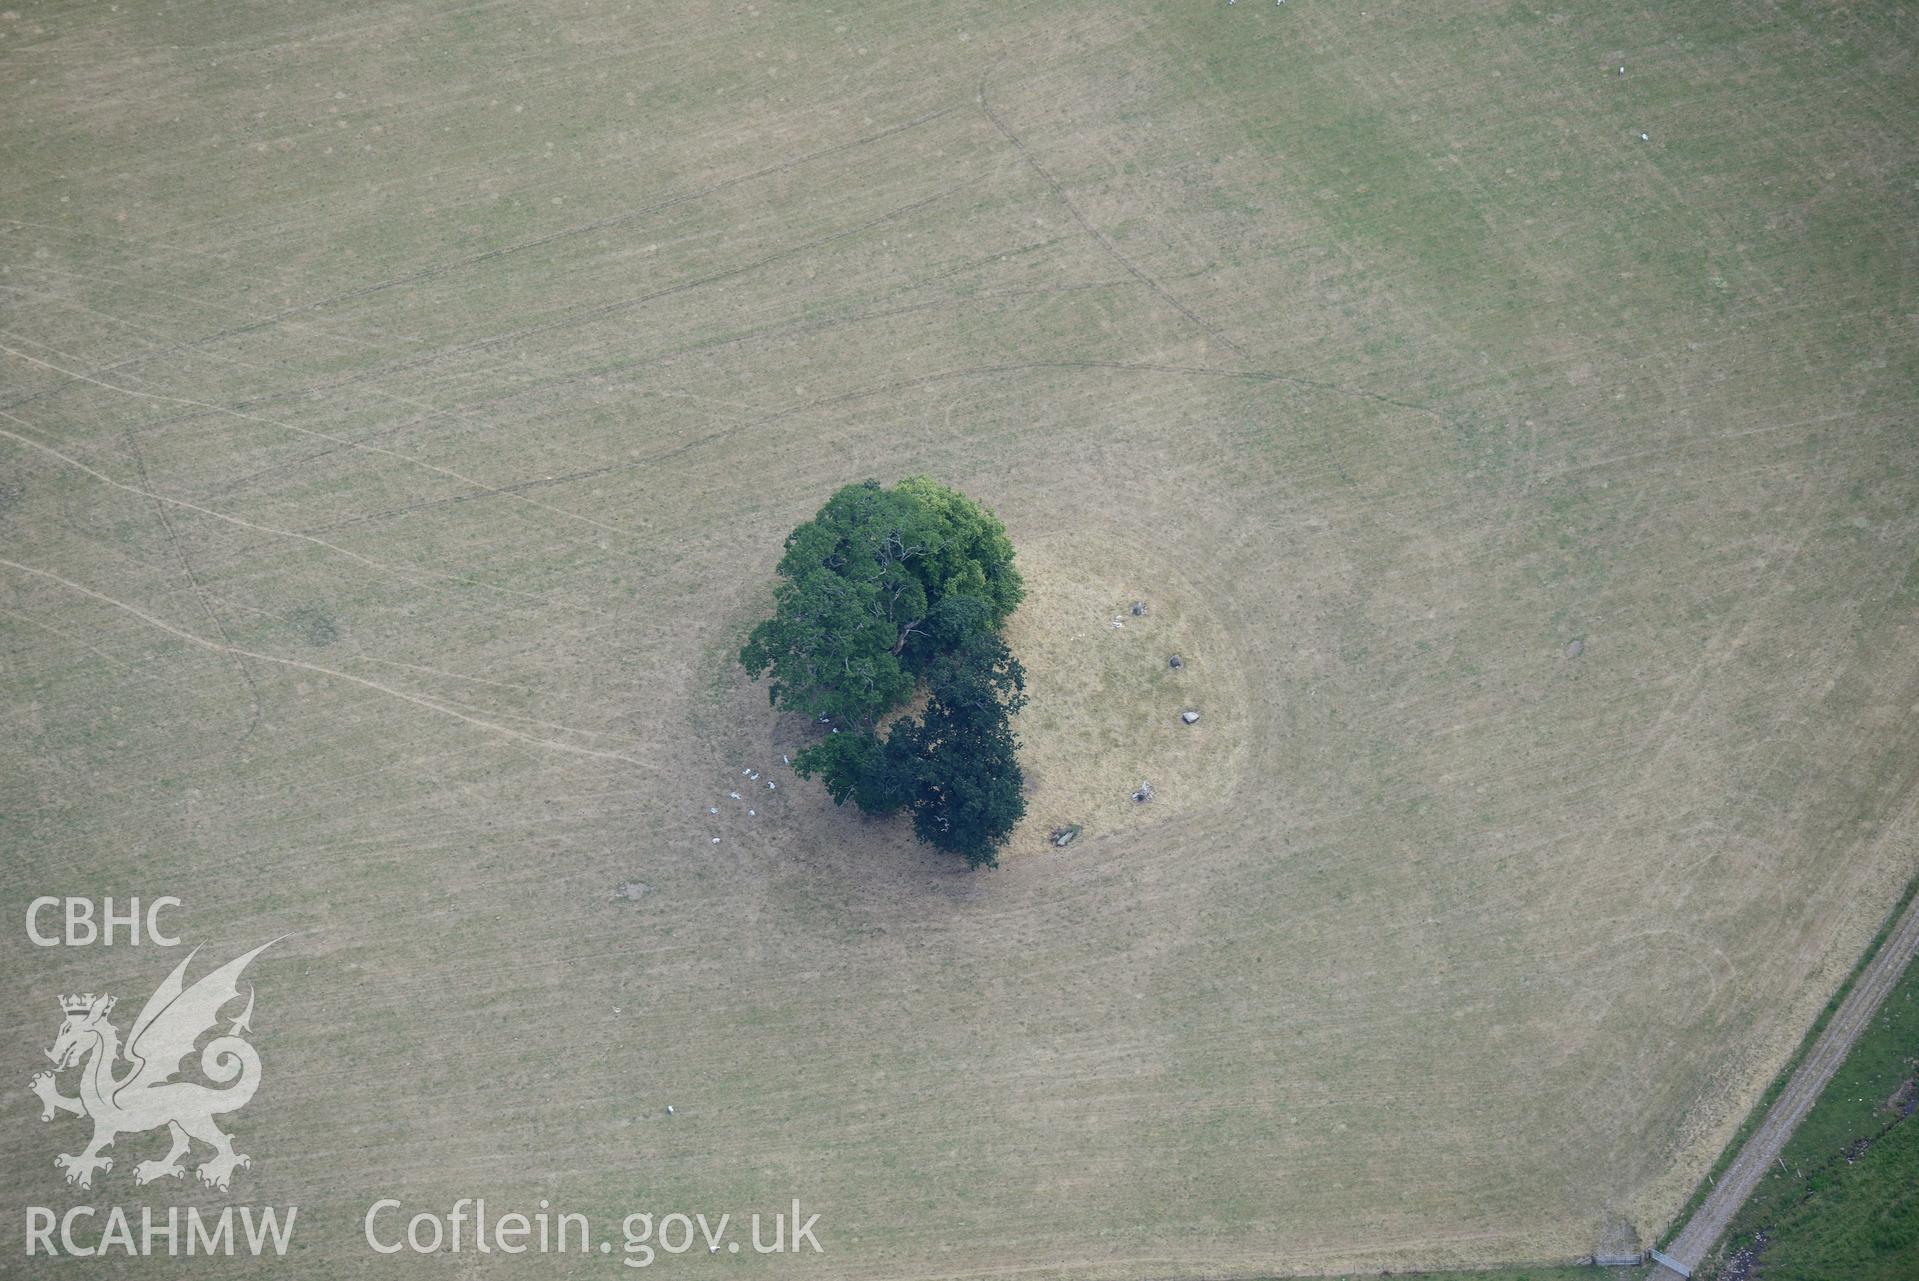 Royal Commission aerial photography of Penbedw Park stone circle taken on 19th July 2018 during the 2018 drought.